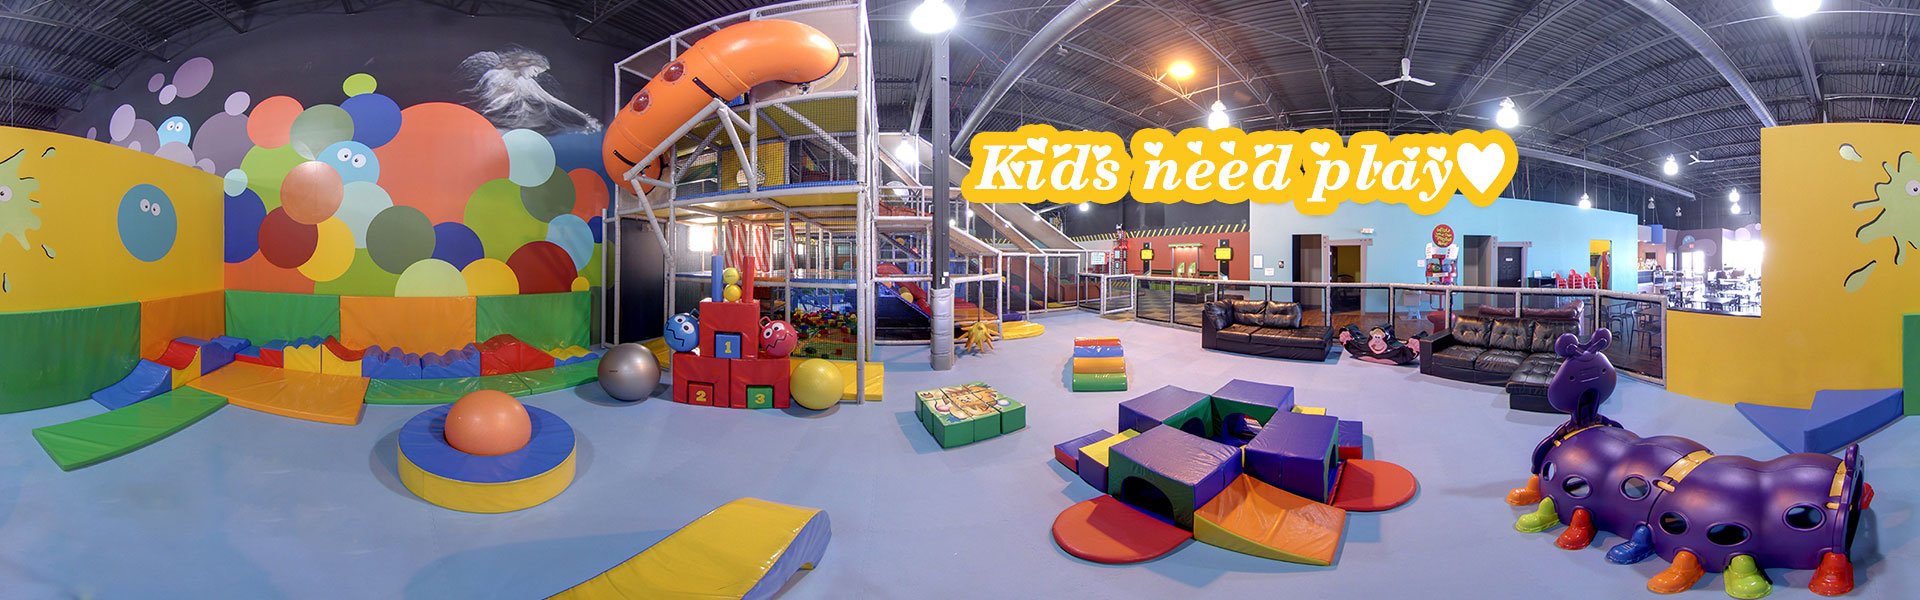 indoor play place business plan